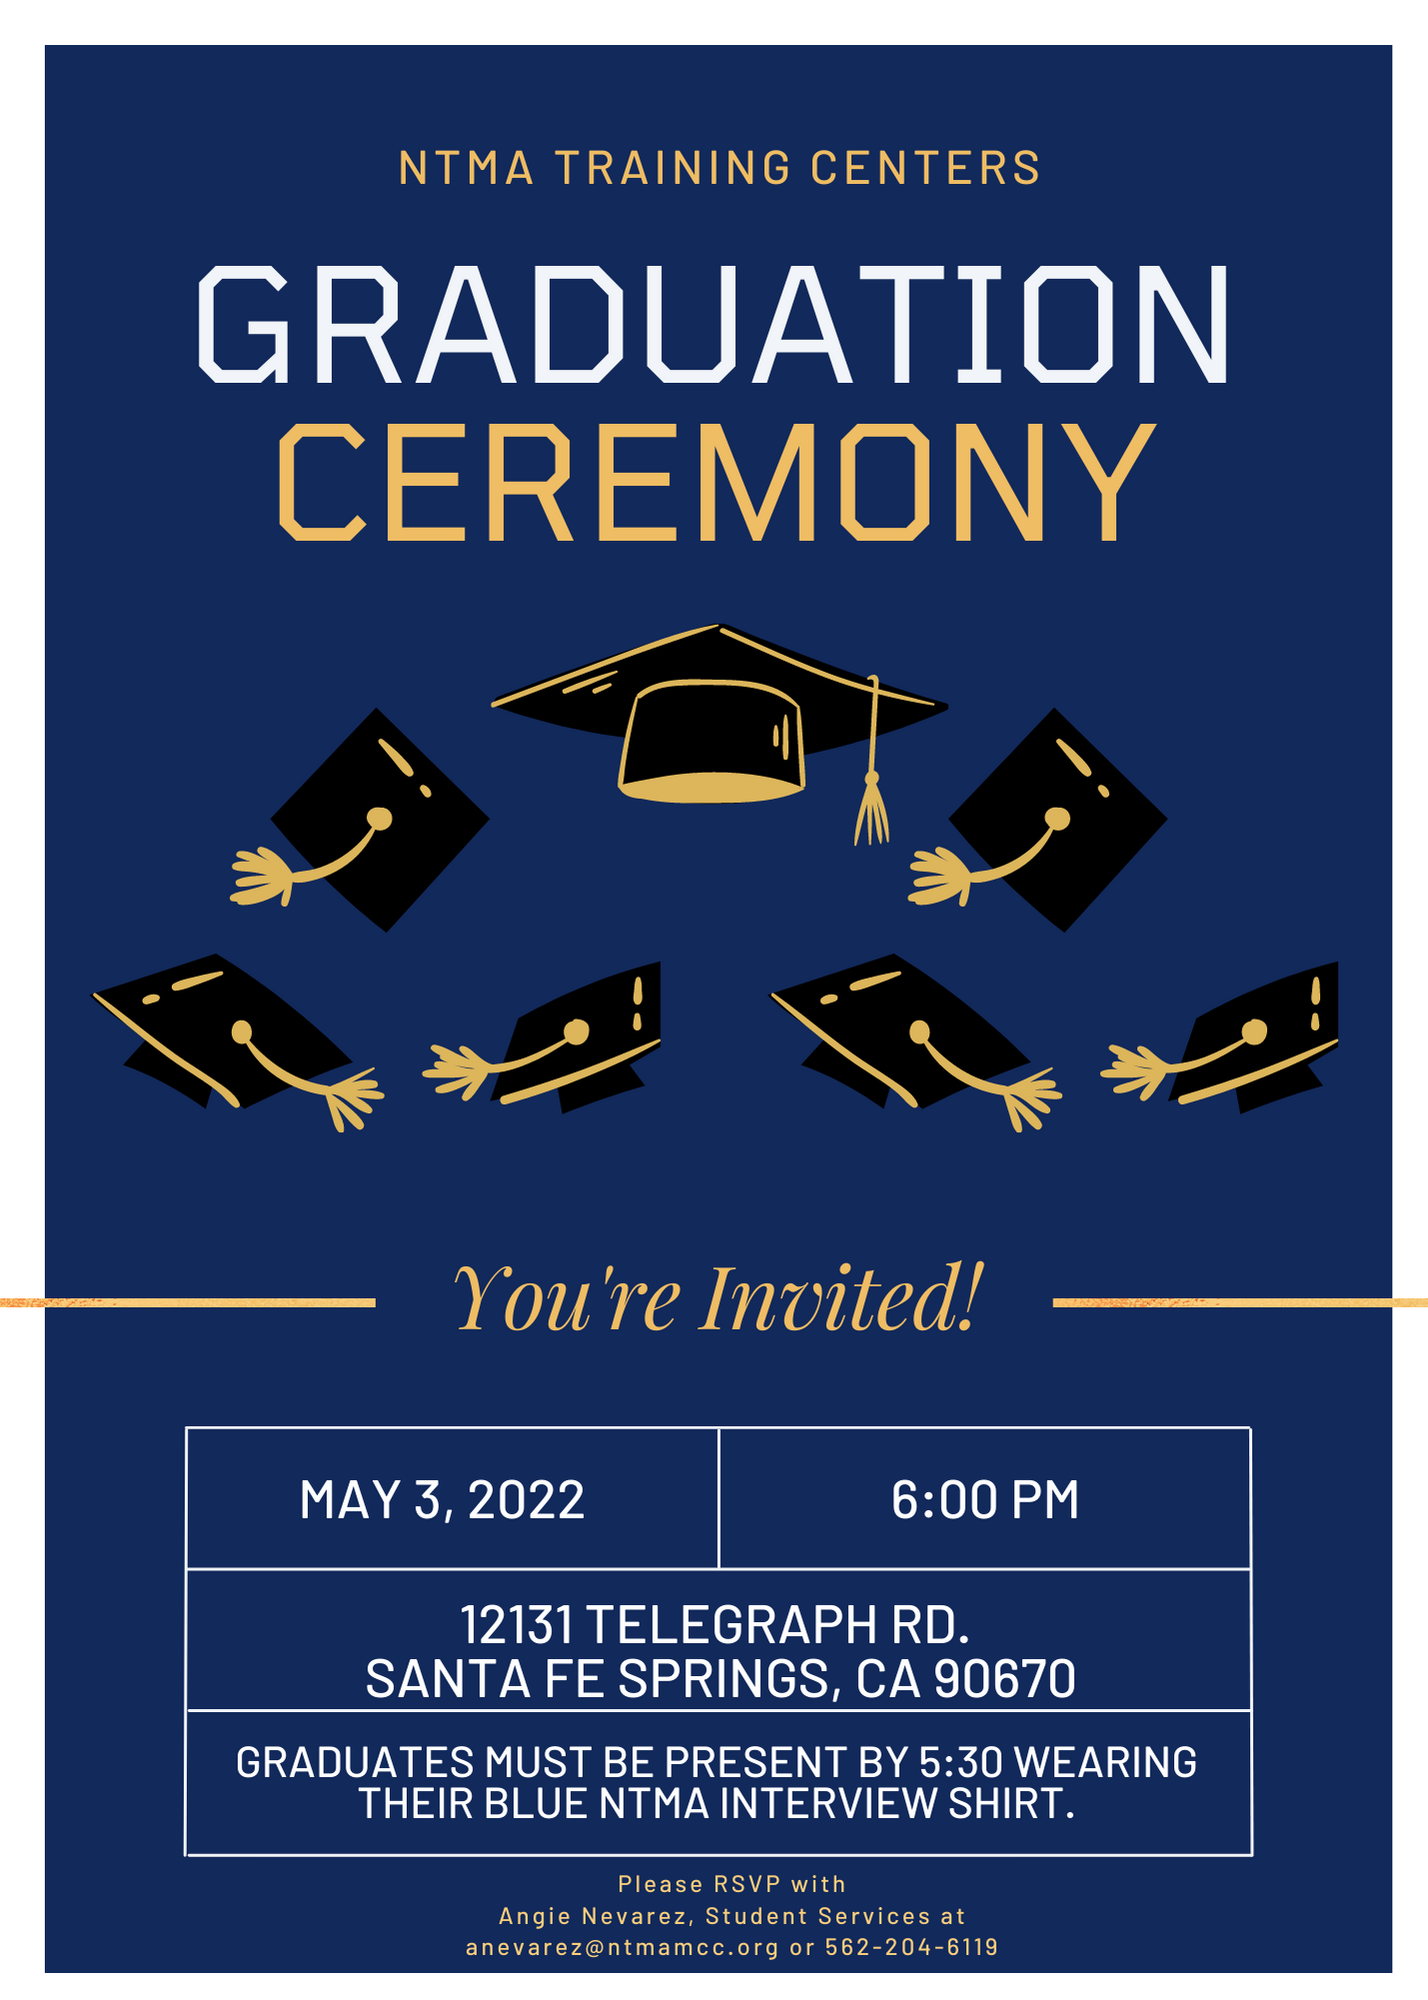 text on poster: NTMA Training Centers Graduation Ceremony. You're Invited! May 3, 2022 6:00 PM 12131 Telegraph Rd. Santa Fe Springs, CA 90670. Graduates must be present by 5:30 wearing their blue NTMA interview shirt. Please RSVP with Angie Nevarez, Student Services at anevarez@ntmacc.org or 562-204-6119